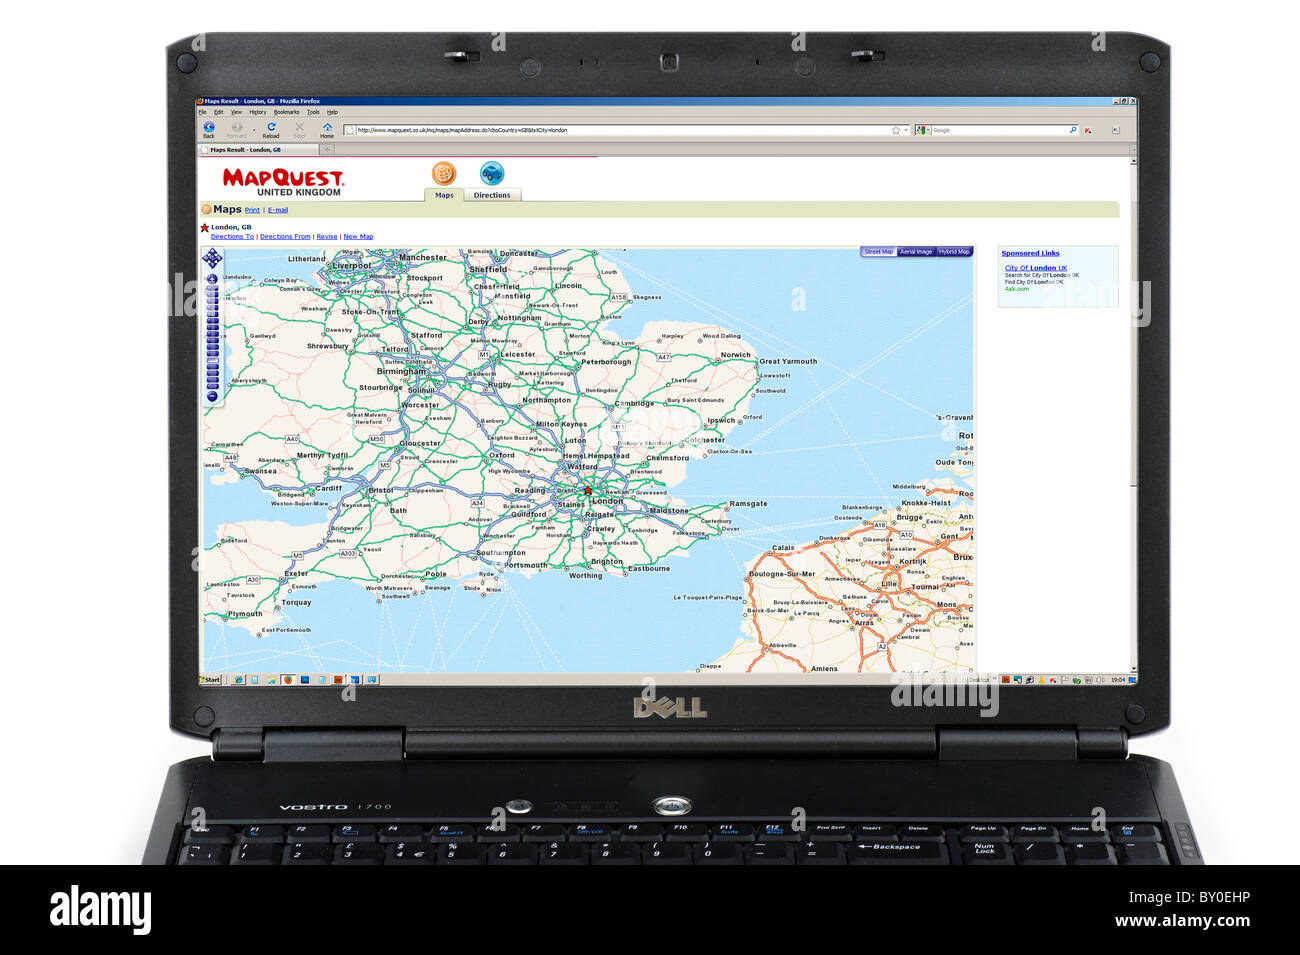 mapquest app for laptop